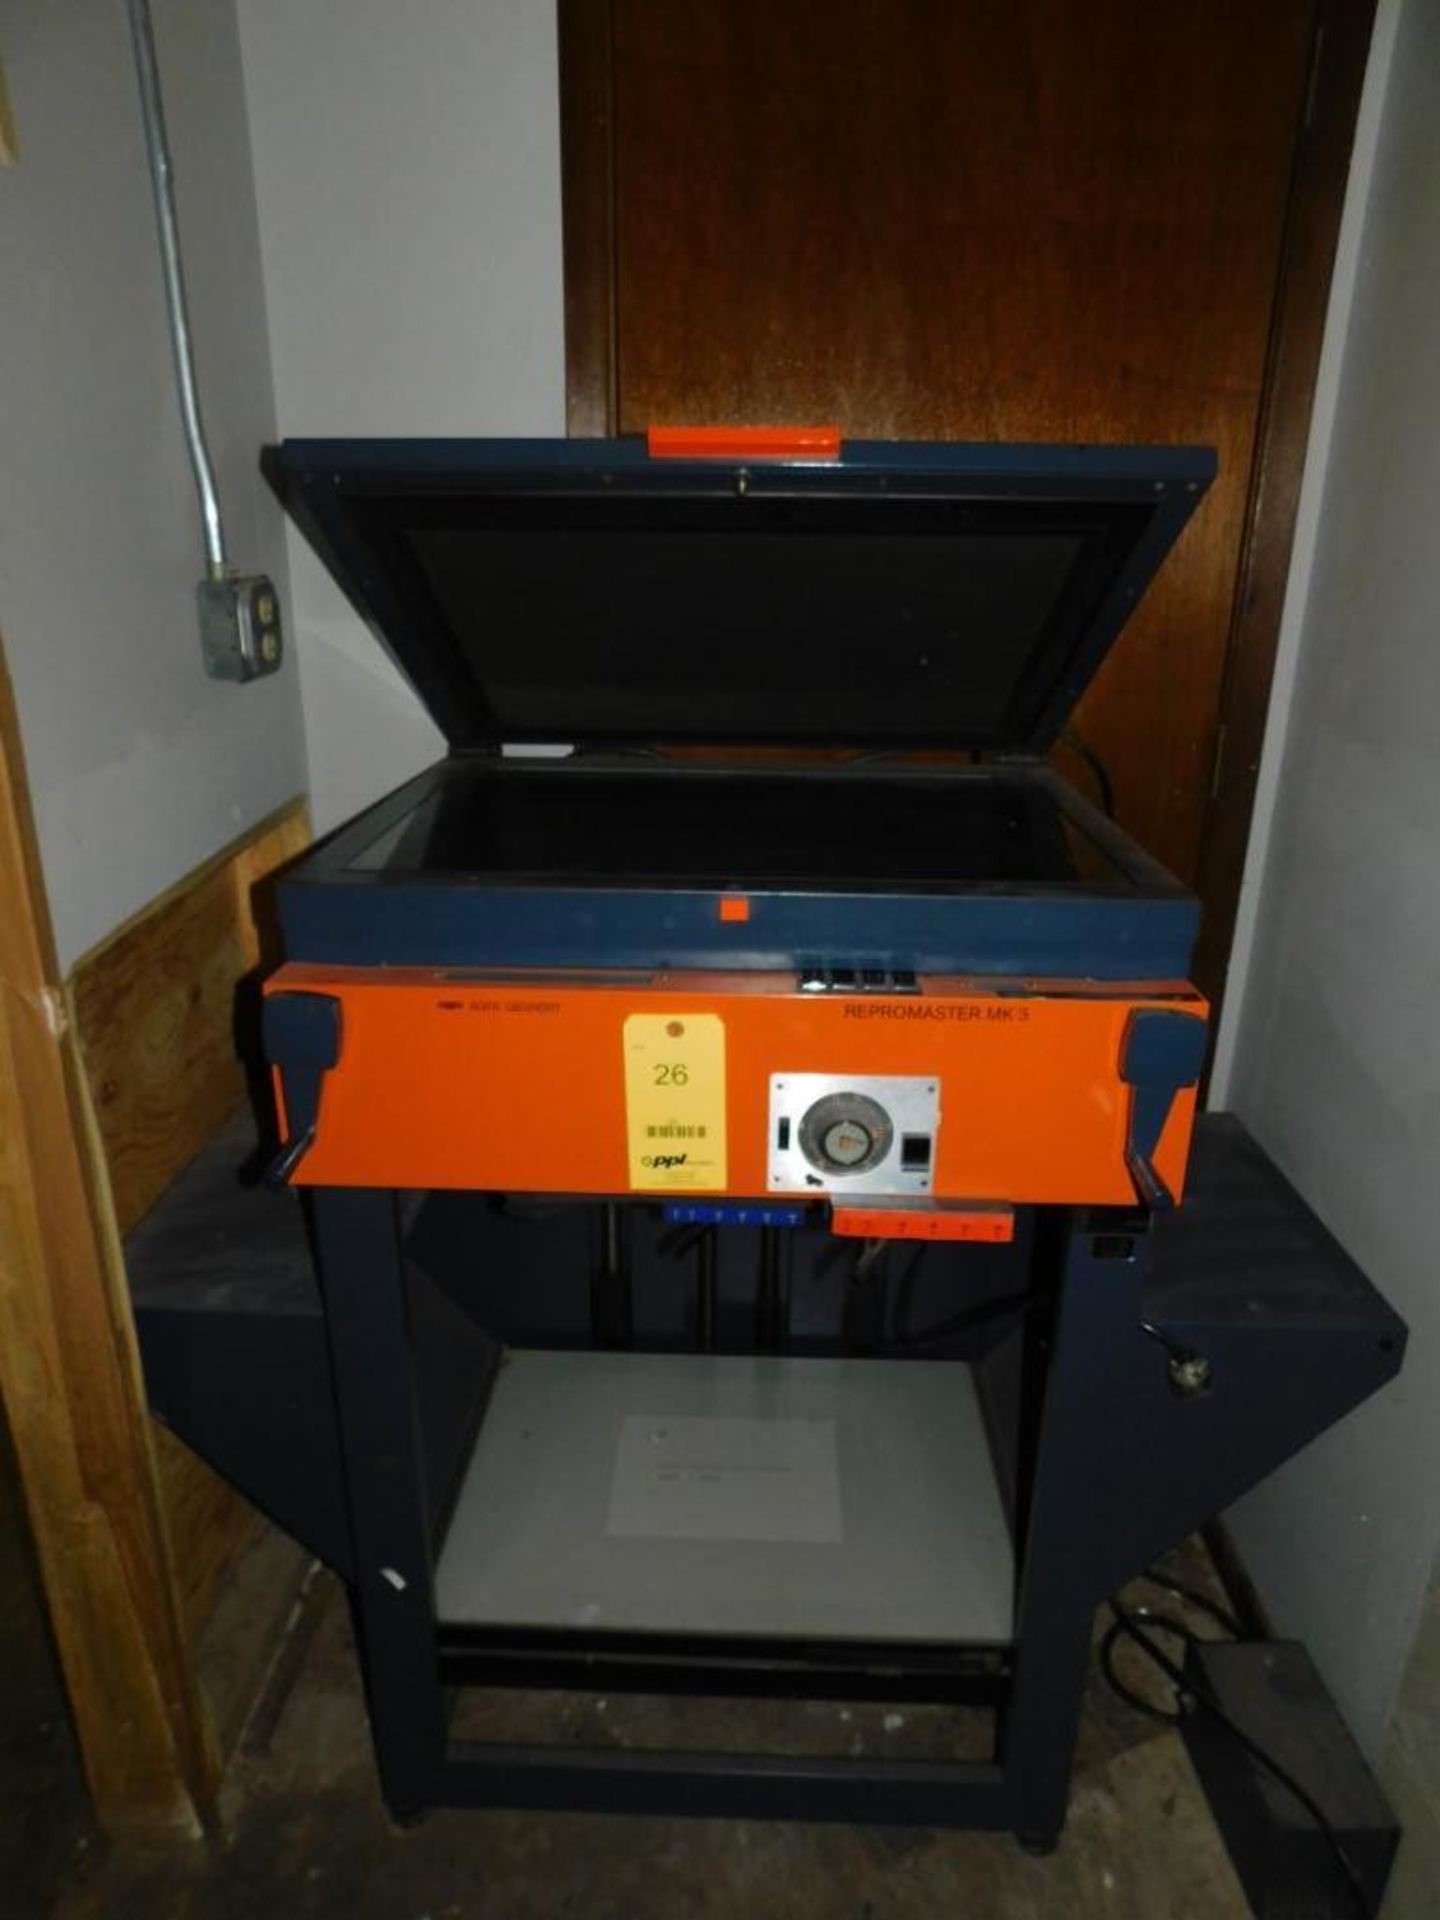 Gevaert Agfa Repromaster MK3 Copyproof Process Camera (LOCATED IN ST. AUGUSTA, MN.)